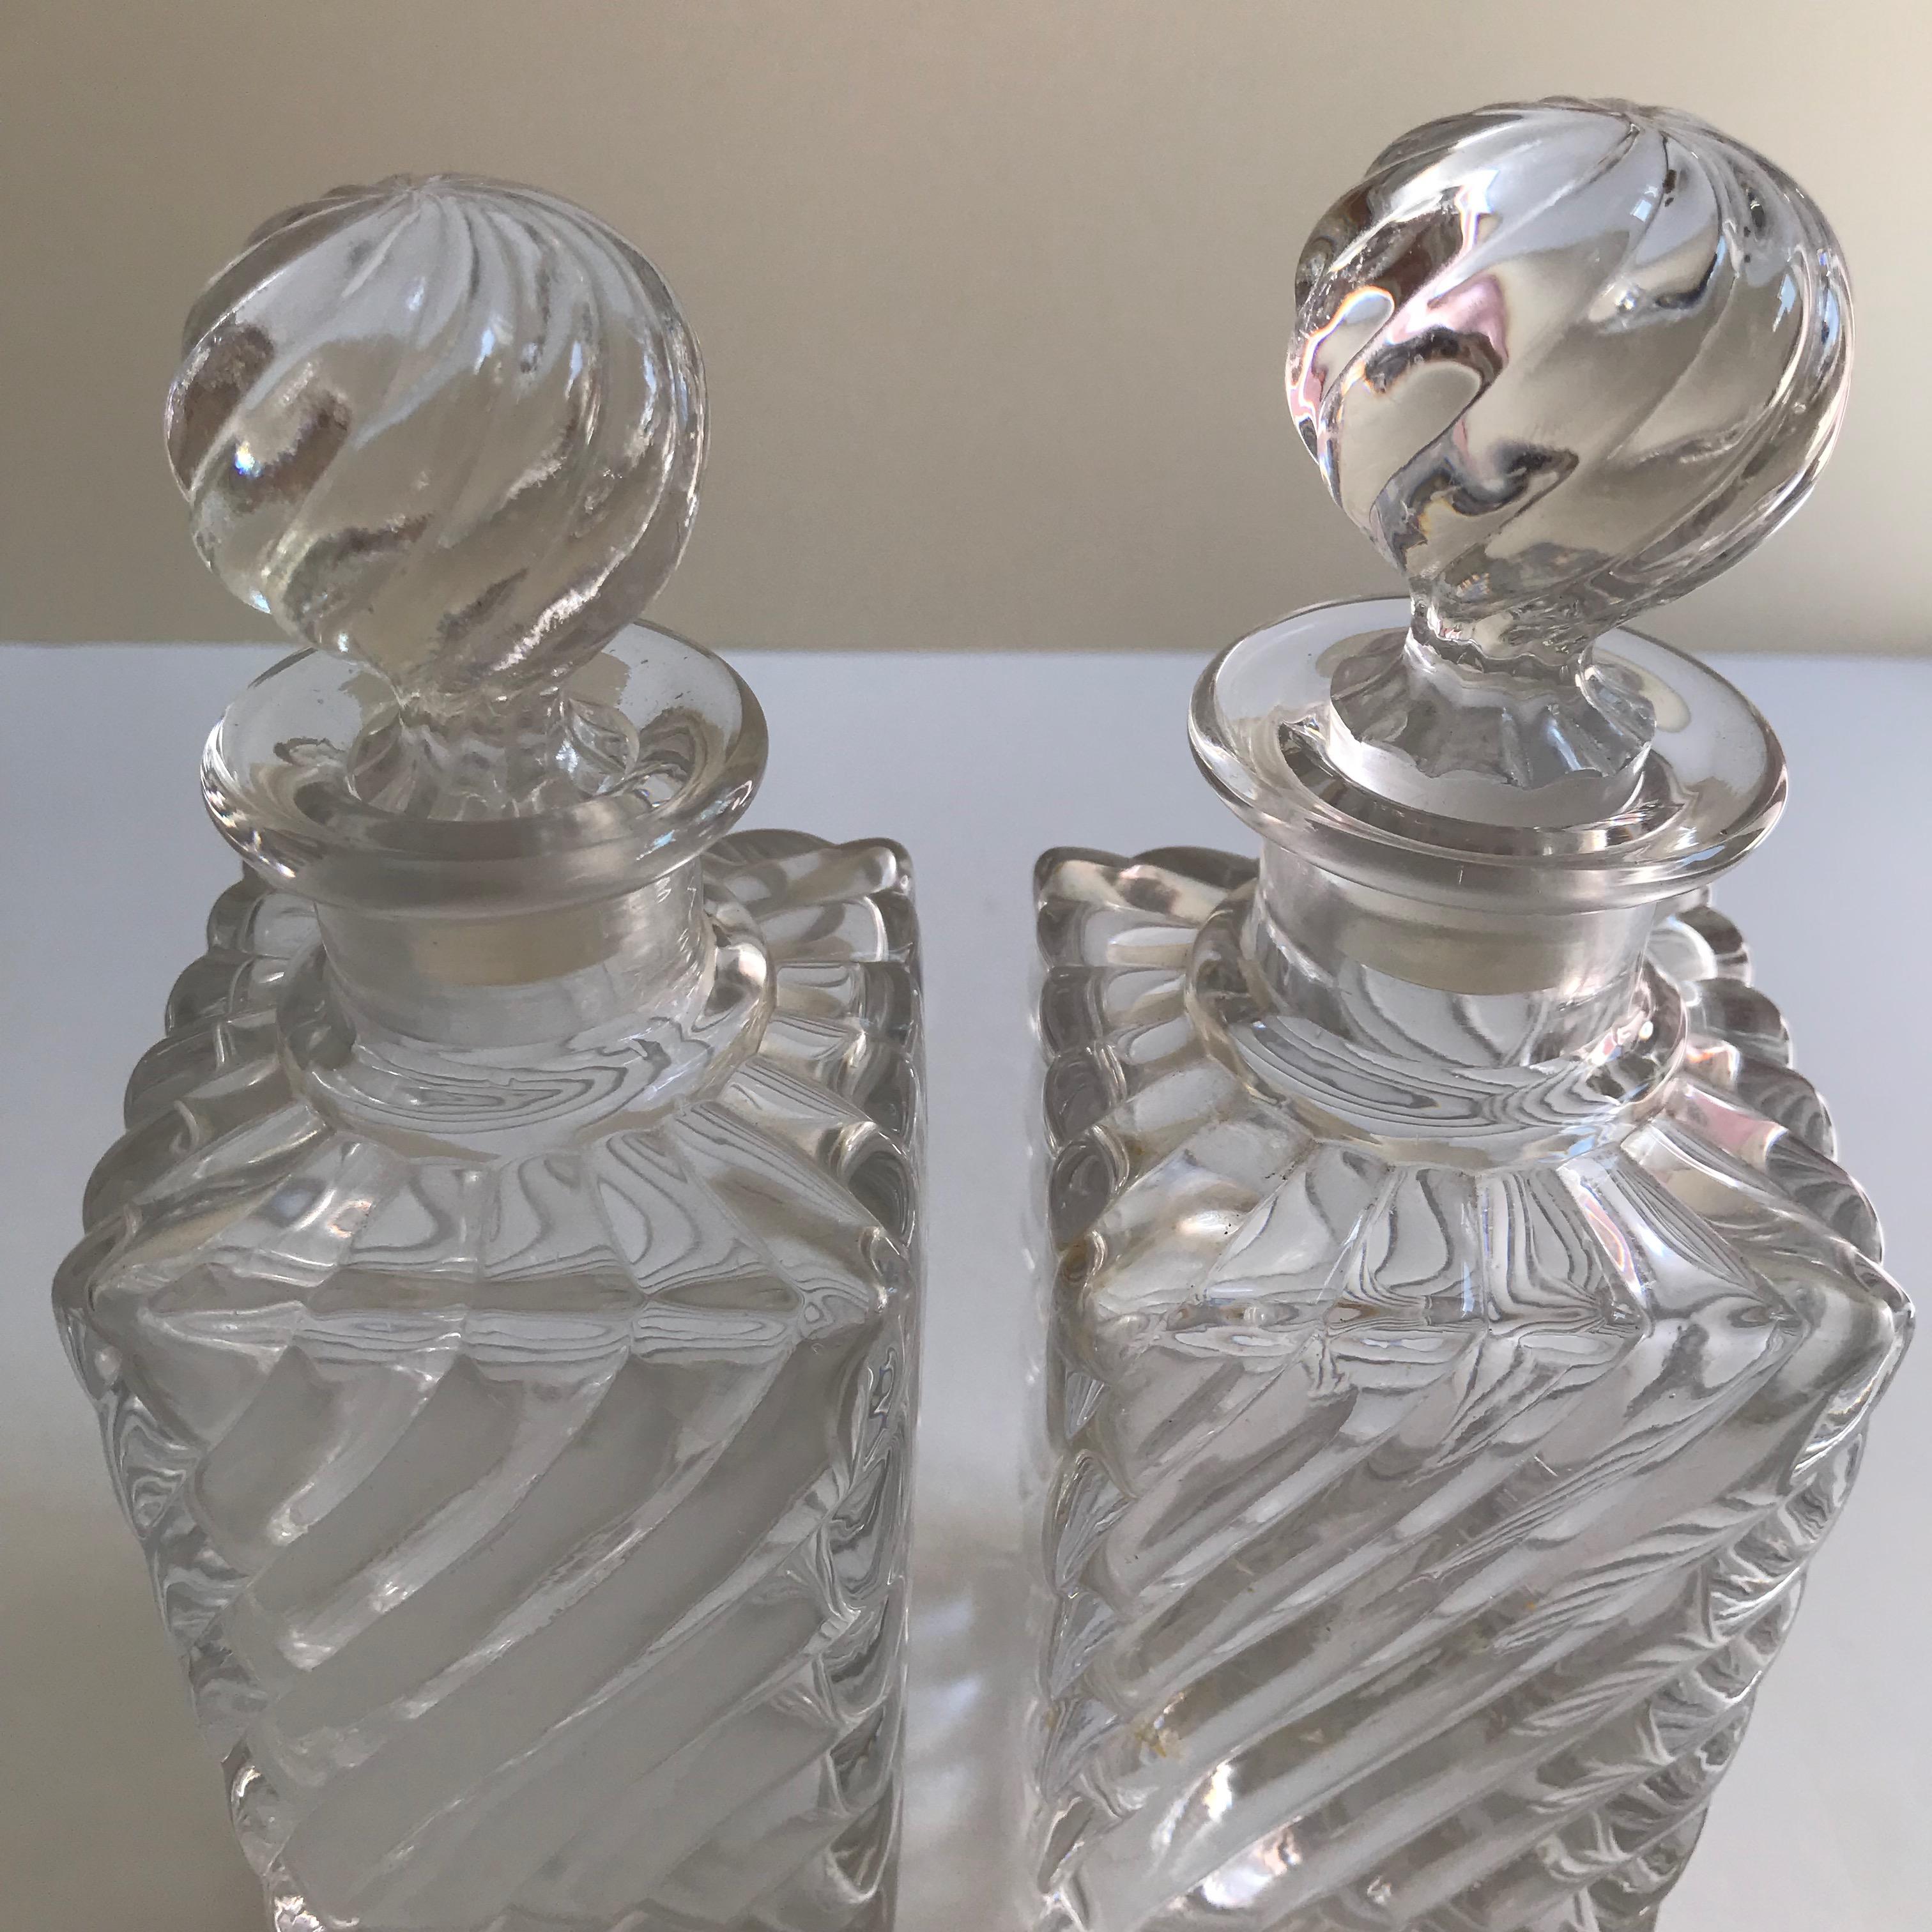 Antique Square Base Crystal Bamboo Swirl Perfume Bottles by Baccarat In Good Condition For Sale In London, GB